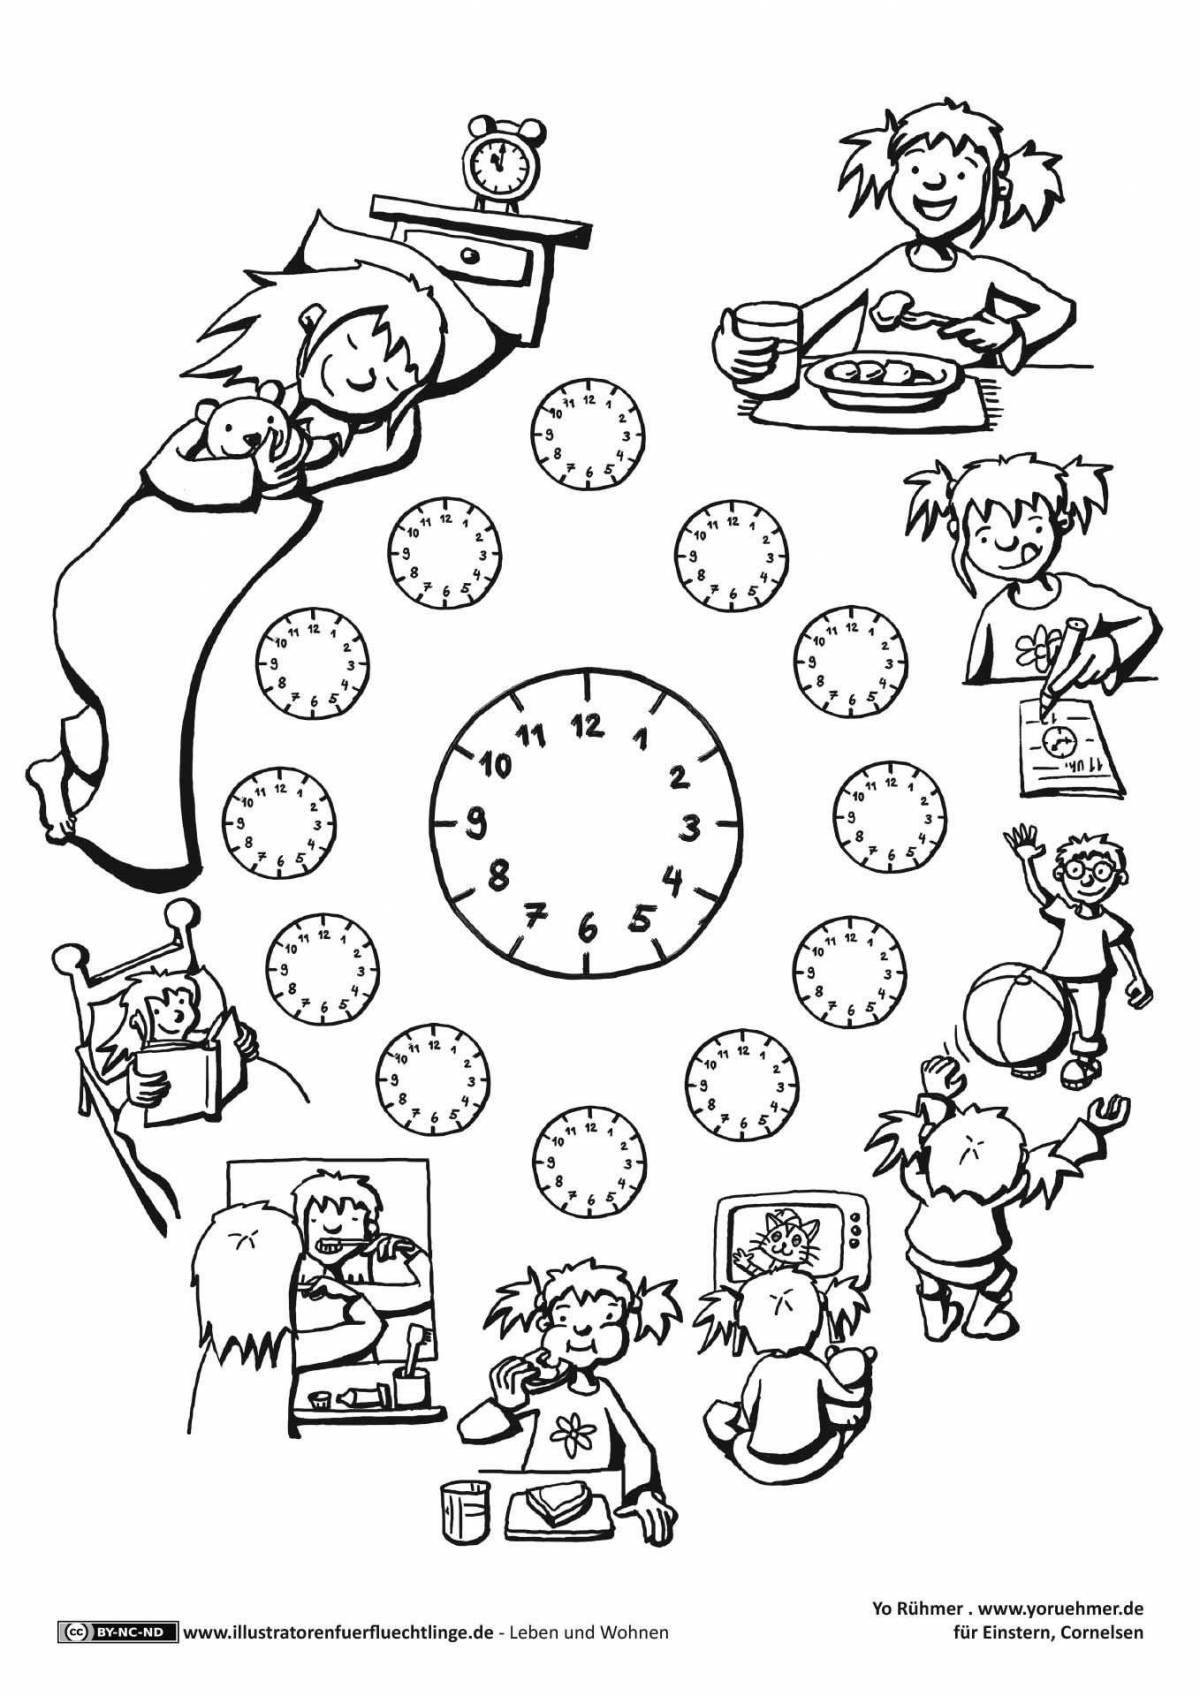 Colorful 2nd grade student daily routine coloring page template